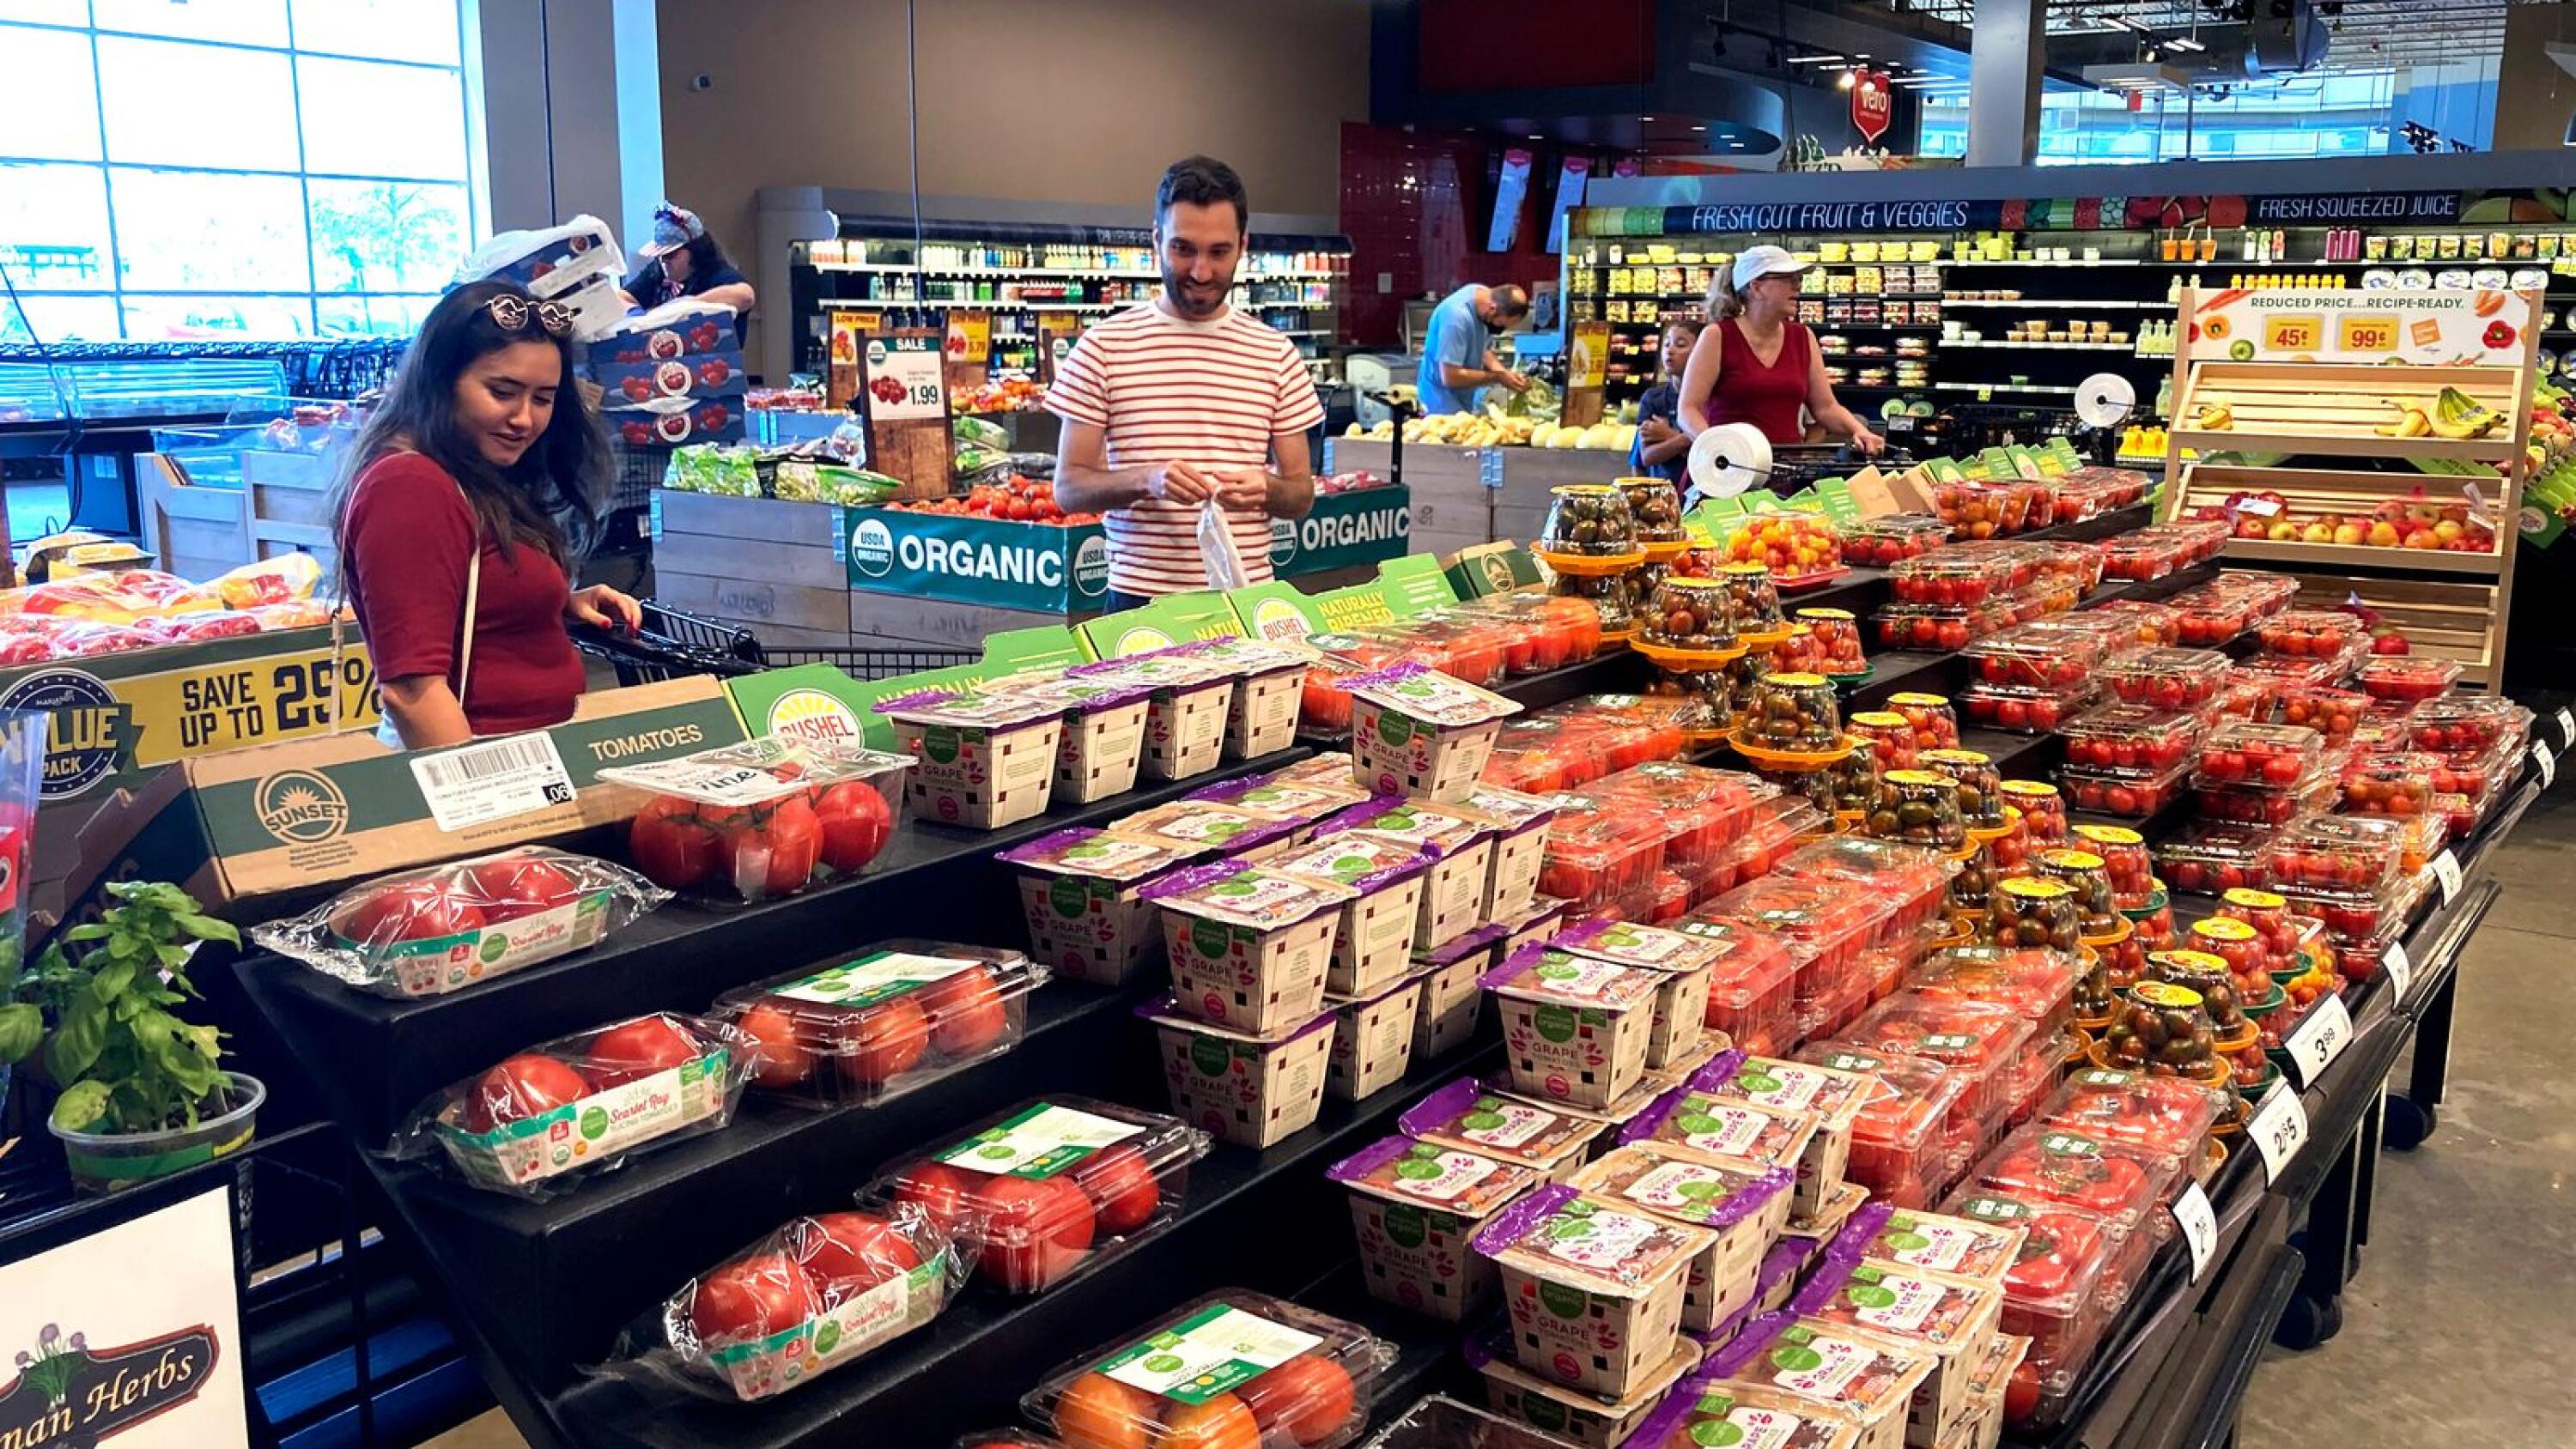 Demand for grocery delivery cools as food costs rise